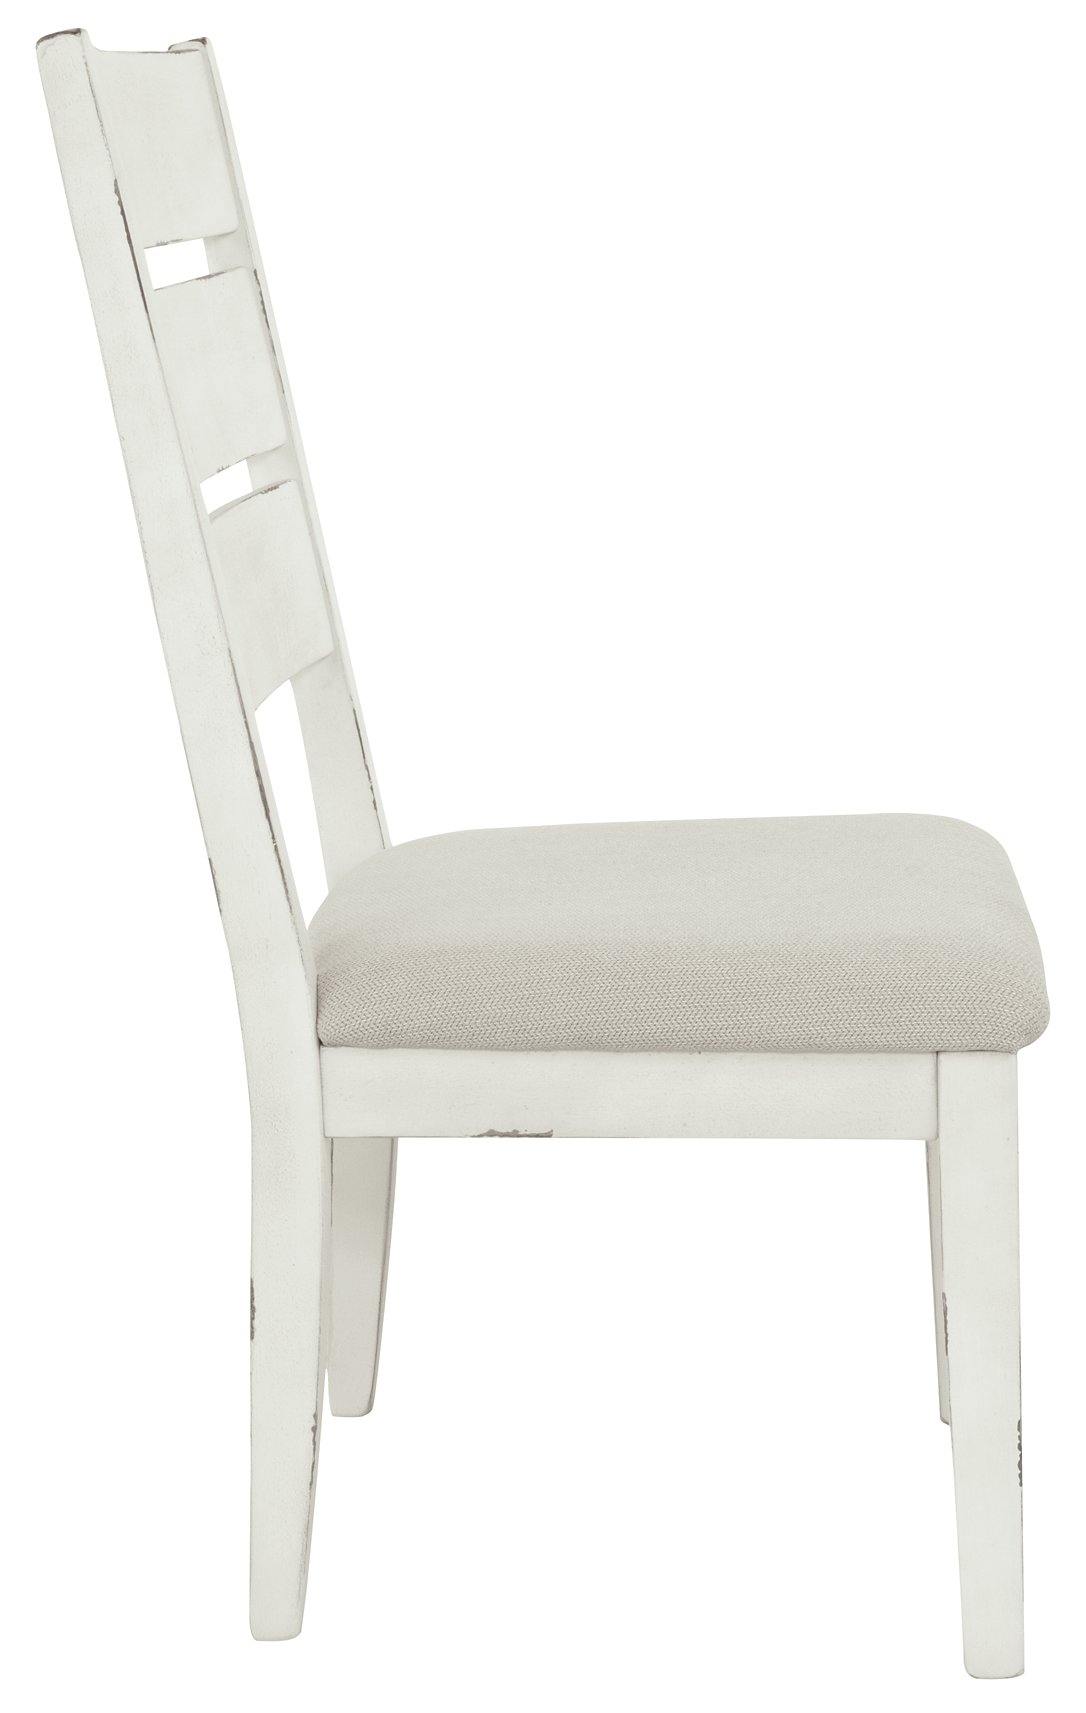 Grindleburg Dining Chair D754-01 Antique White Casual formal seating By ashley - sofafair.com